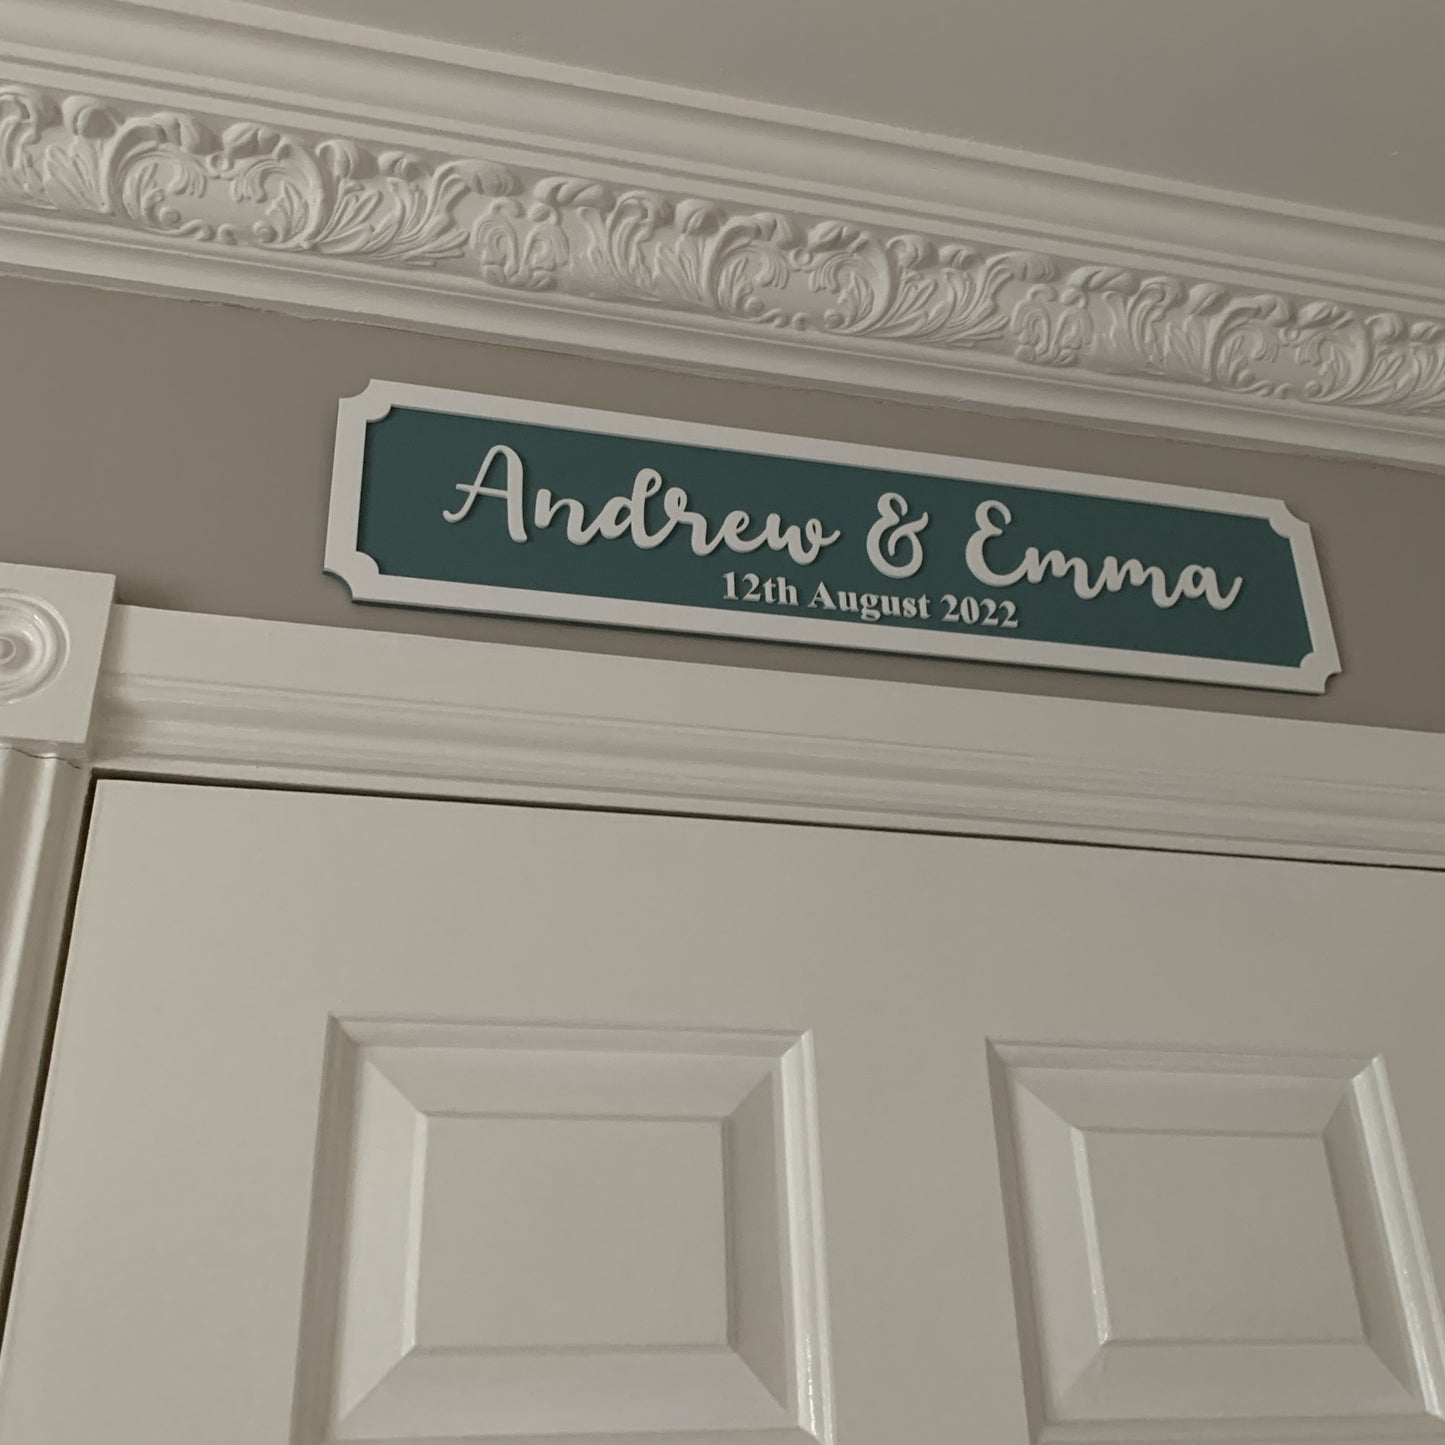 Personalised 3D Railway / Street Sign - Couples First Names & Memorable Date